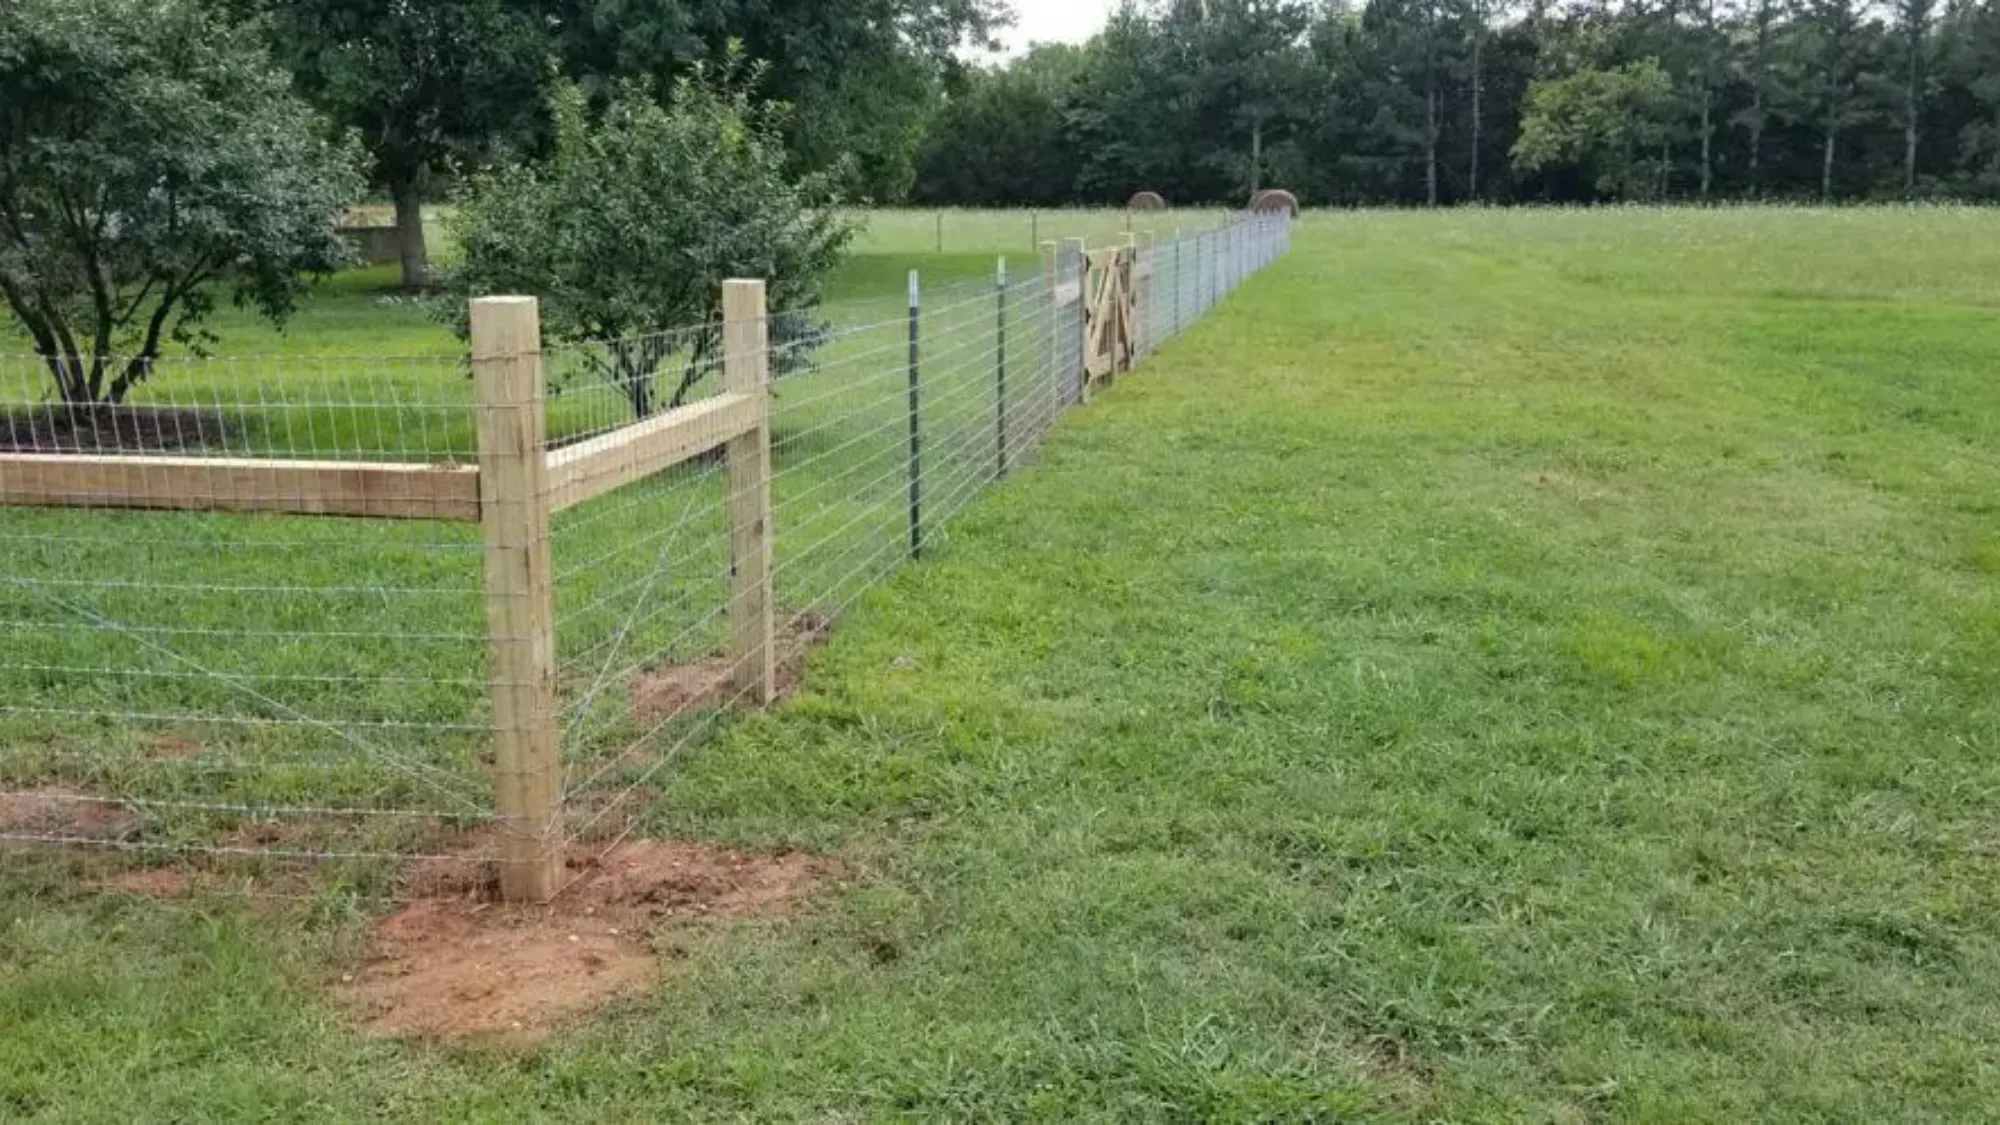 Secure & Easy DIY T-Post Dog Fence Guide